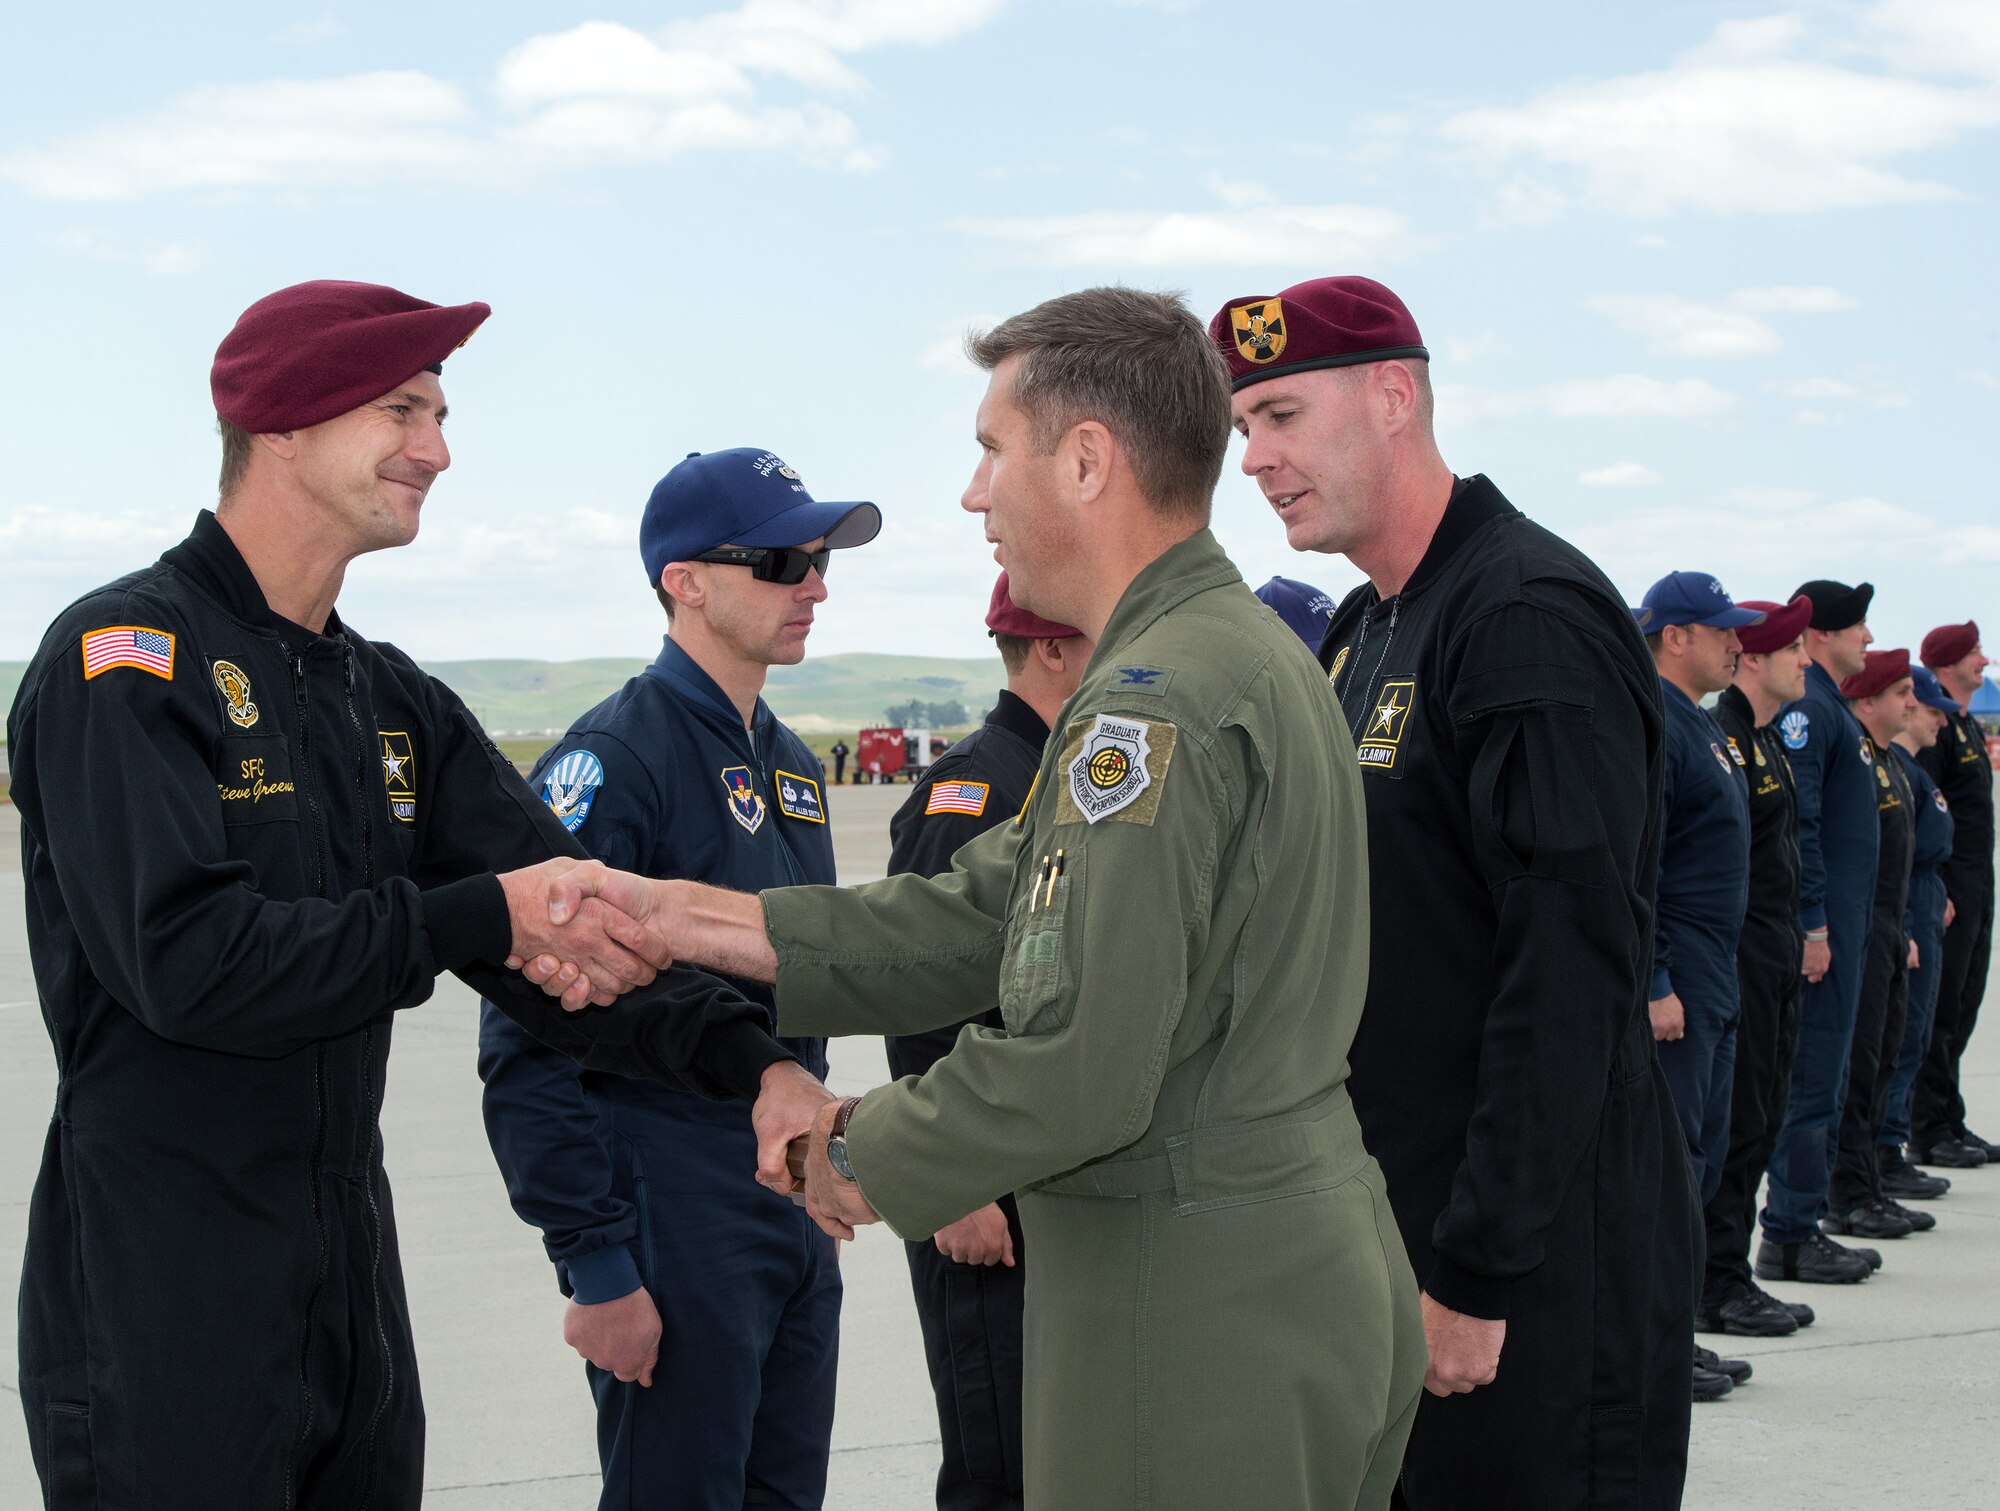 U.S. Air Force Col. John Klein, 60th Air Mobility Wing commander, receives a baton from the U.S. Army Golden Knights parachute team during the Wings Over Solano Air Show at Travis Air Force Base, Calif., May 6, 2017. The two-day event featured performances by the Golden Knights, U.S. Air Force Thunderbirds, flyovers and static displays. (U.S. Air Force photo by Louis Briscese)